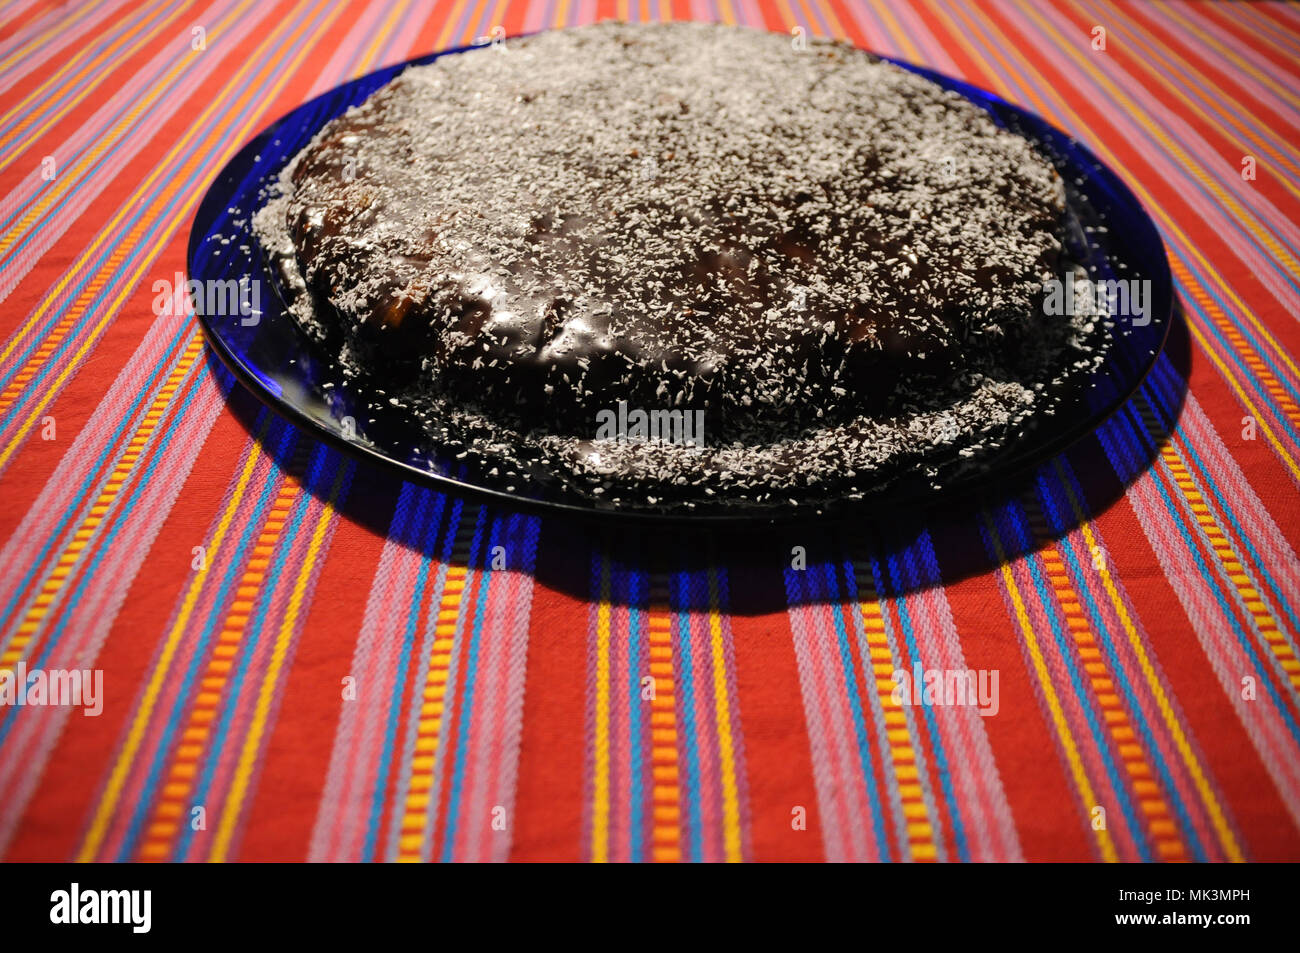 Homemade cake on a colorful table. Chocolate cake with cocos respells Stock Photo